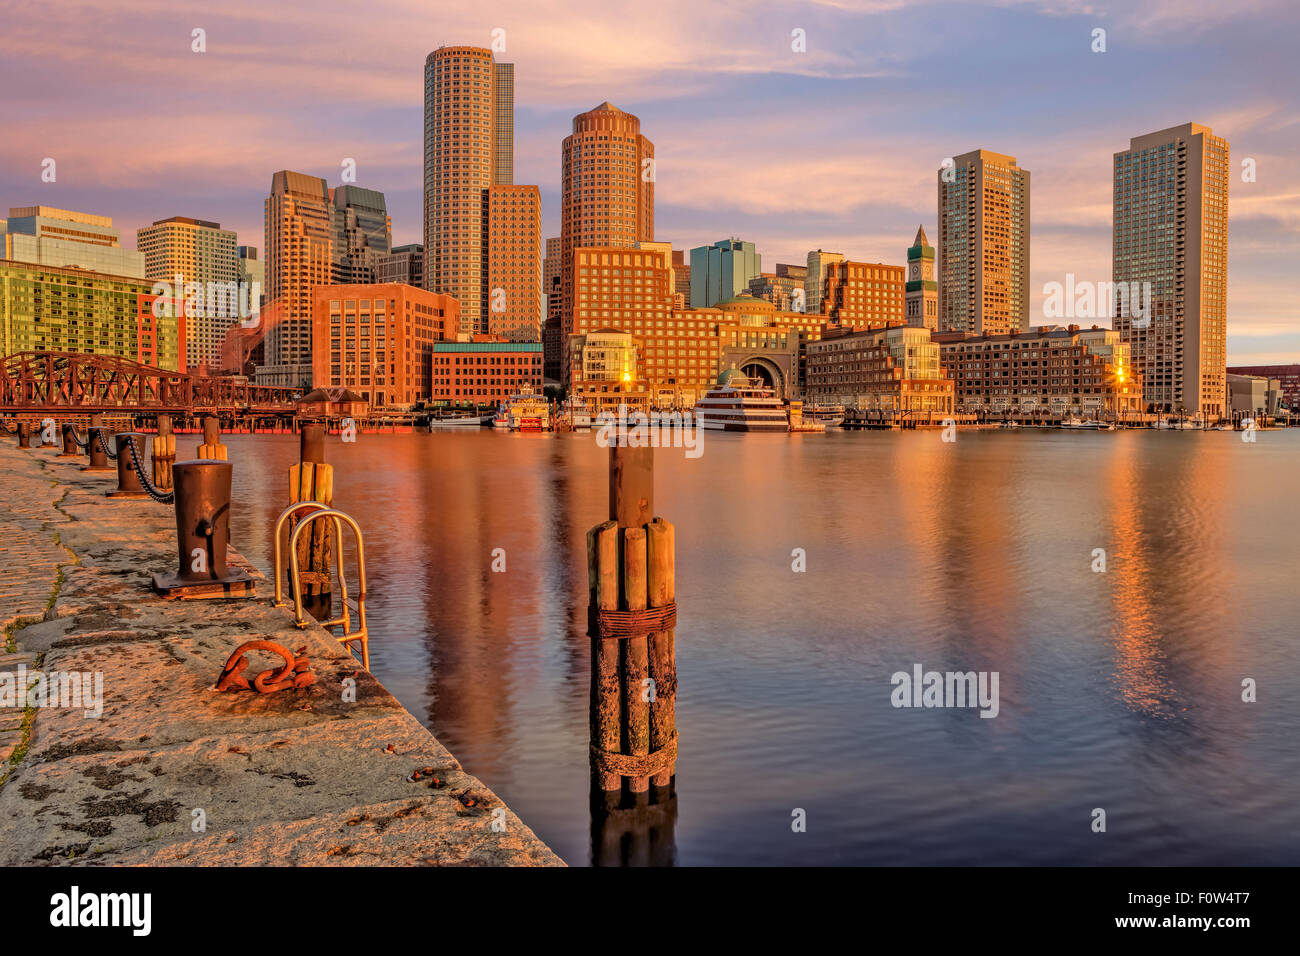 Boston Habor Sunrise - A view during sunrise to the Boston Harbor with the Boston Financial District's dramatic skyline.  Seen is Rowes Wharf, the Odyssey Cruise Yacht, along with other high rises along the waterfront. Stock Photo